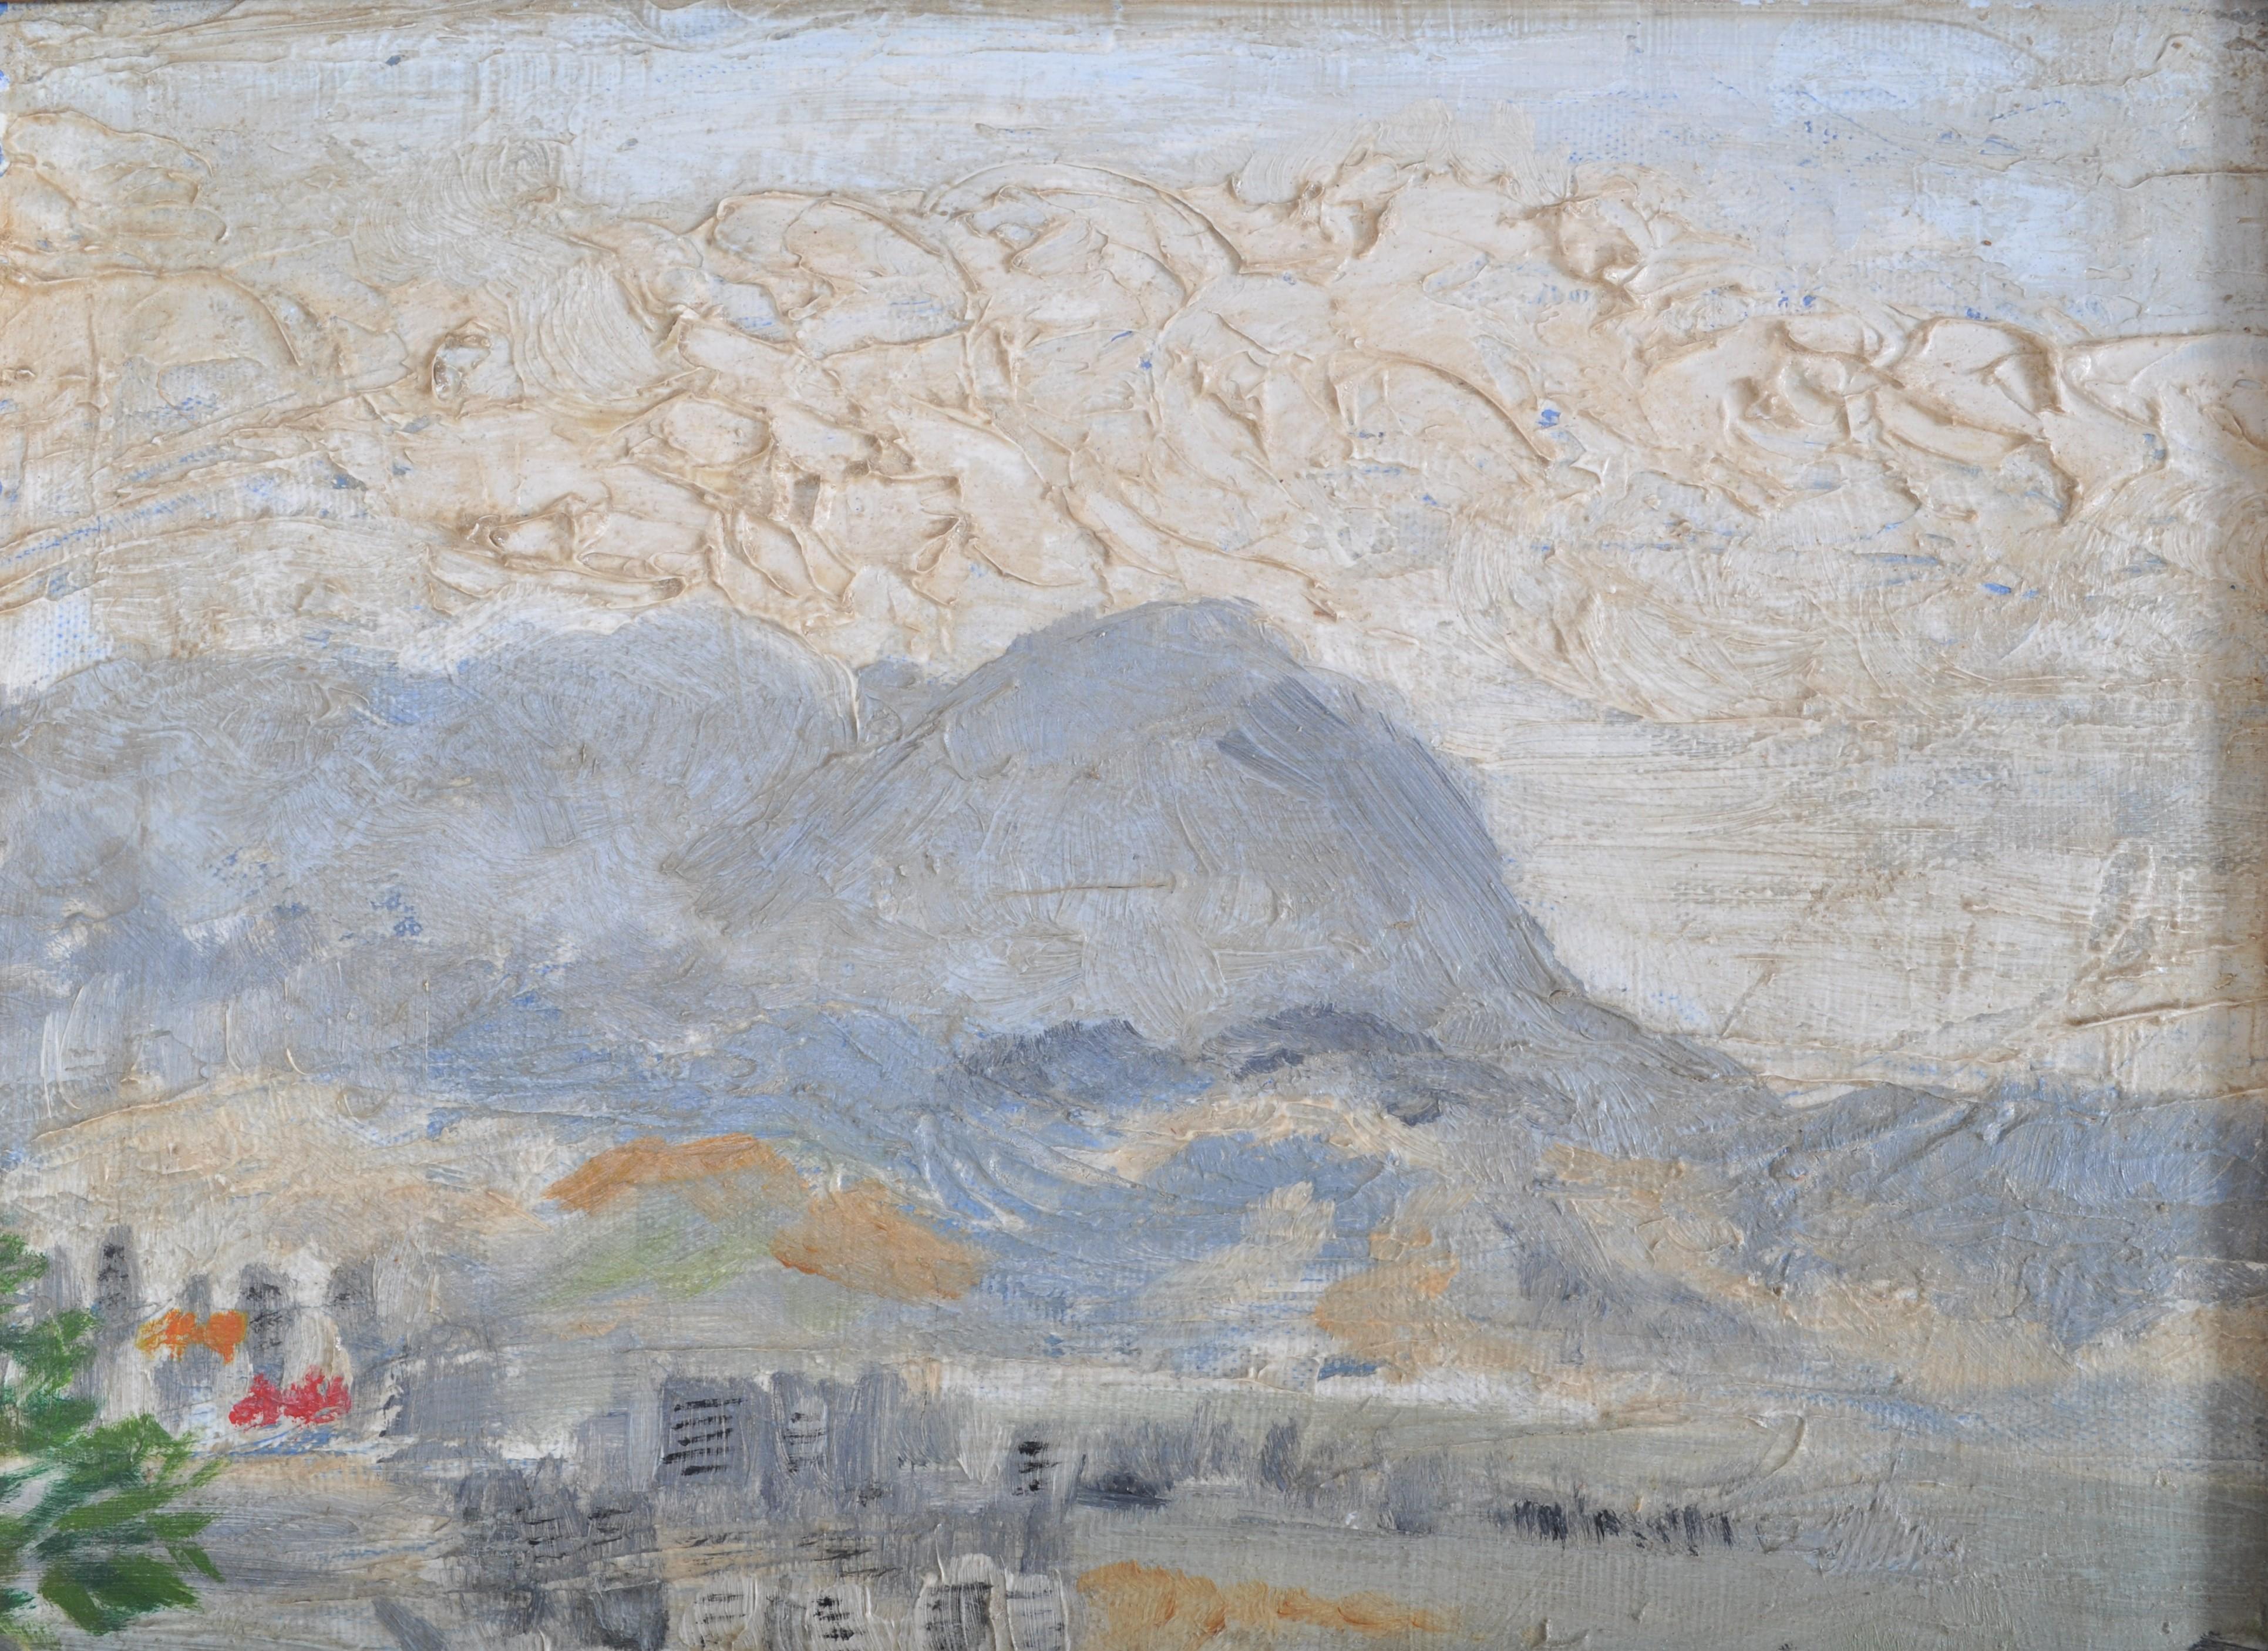 Important, Impressionist original oil painting on artist's board, a landscape of Hong Kong circa 1950s, by the renowned Chinese Artist Hu Shanyu (1909-1993).

Hu Shanyu was born in Guangdong, China in 1909. He entered the National Hangzhou Academy